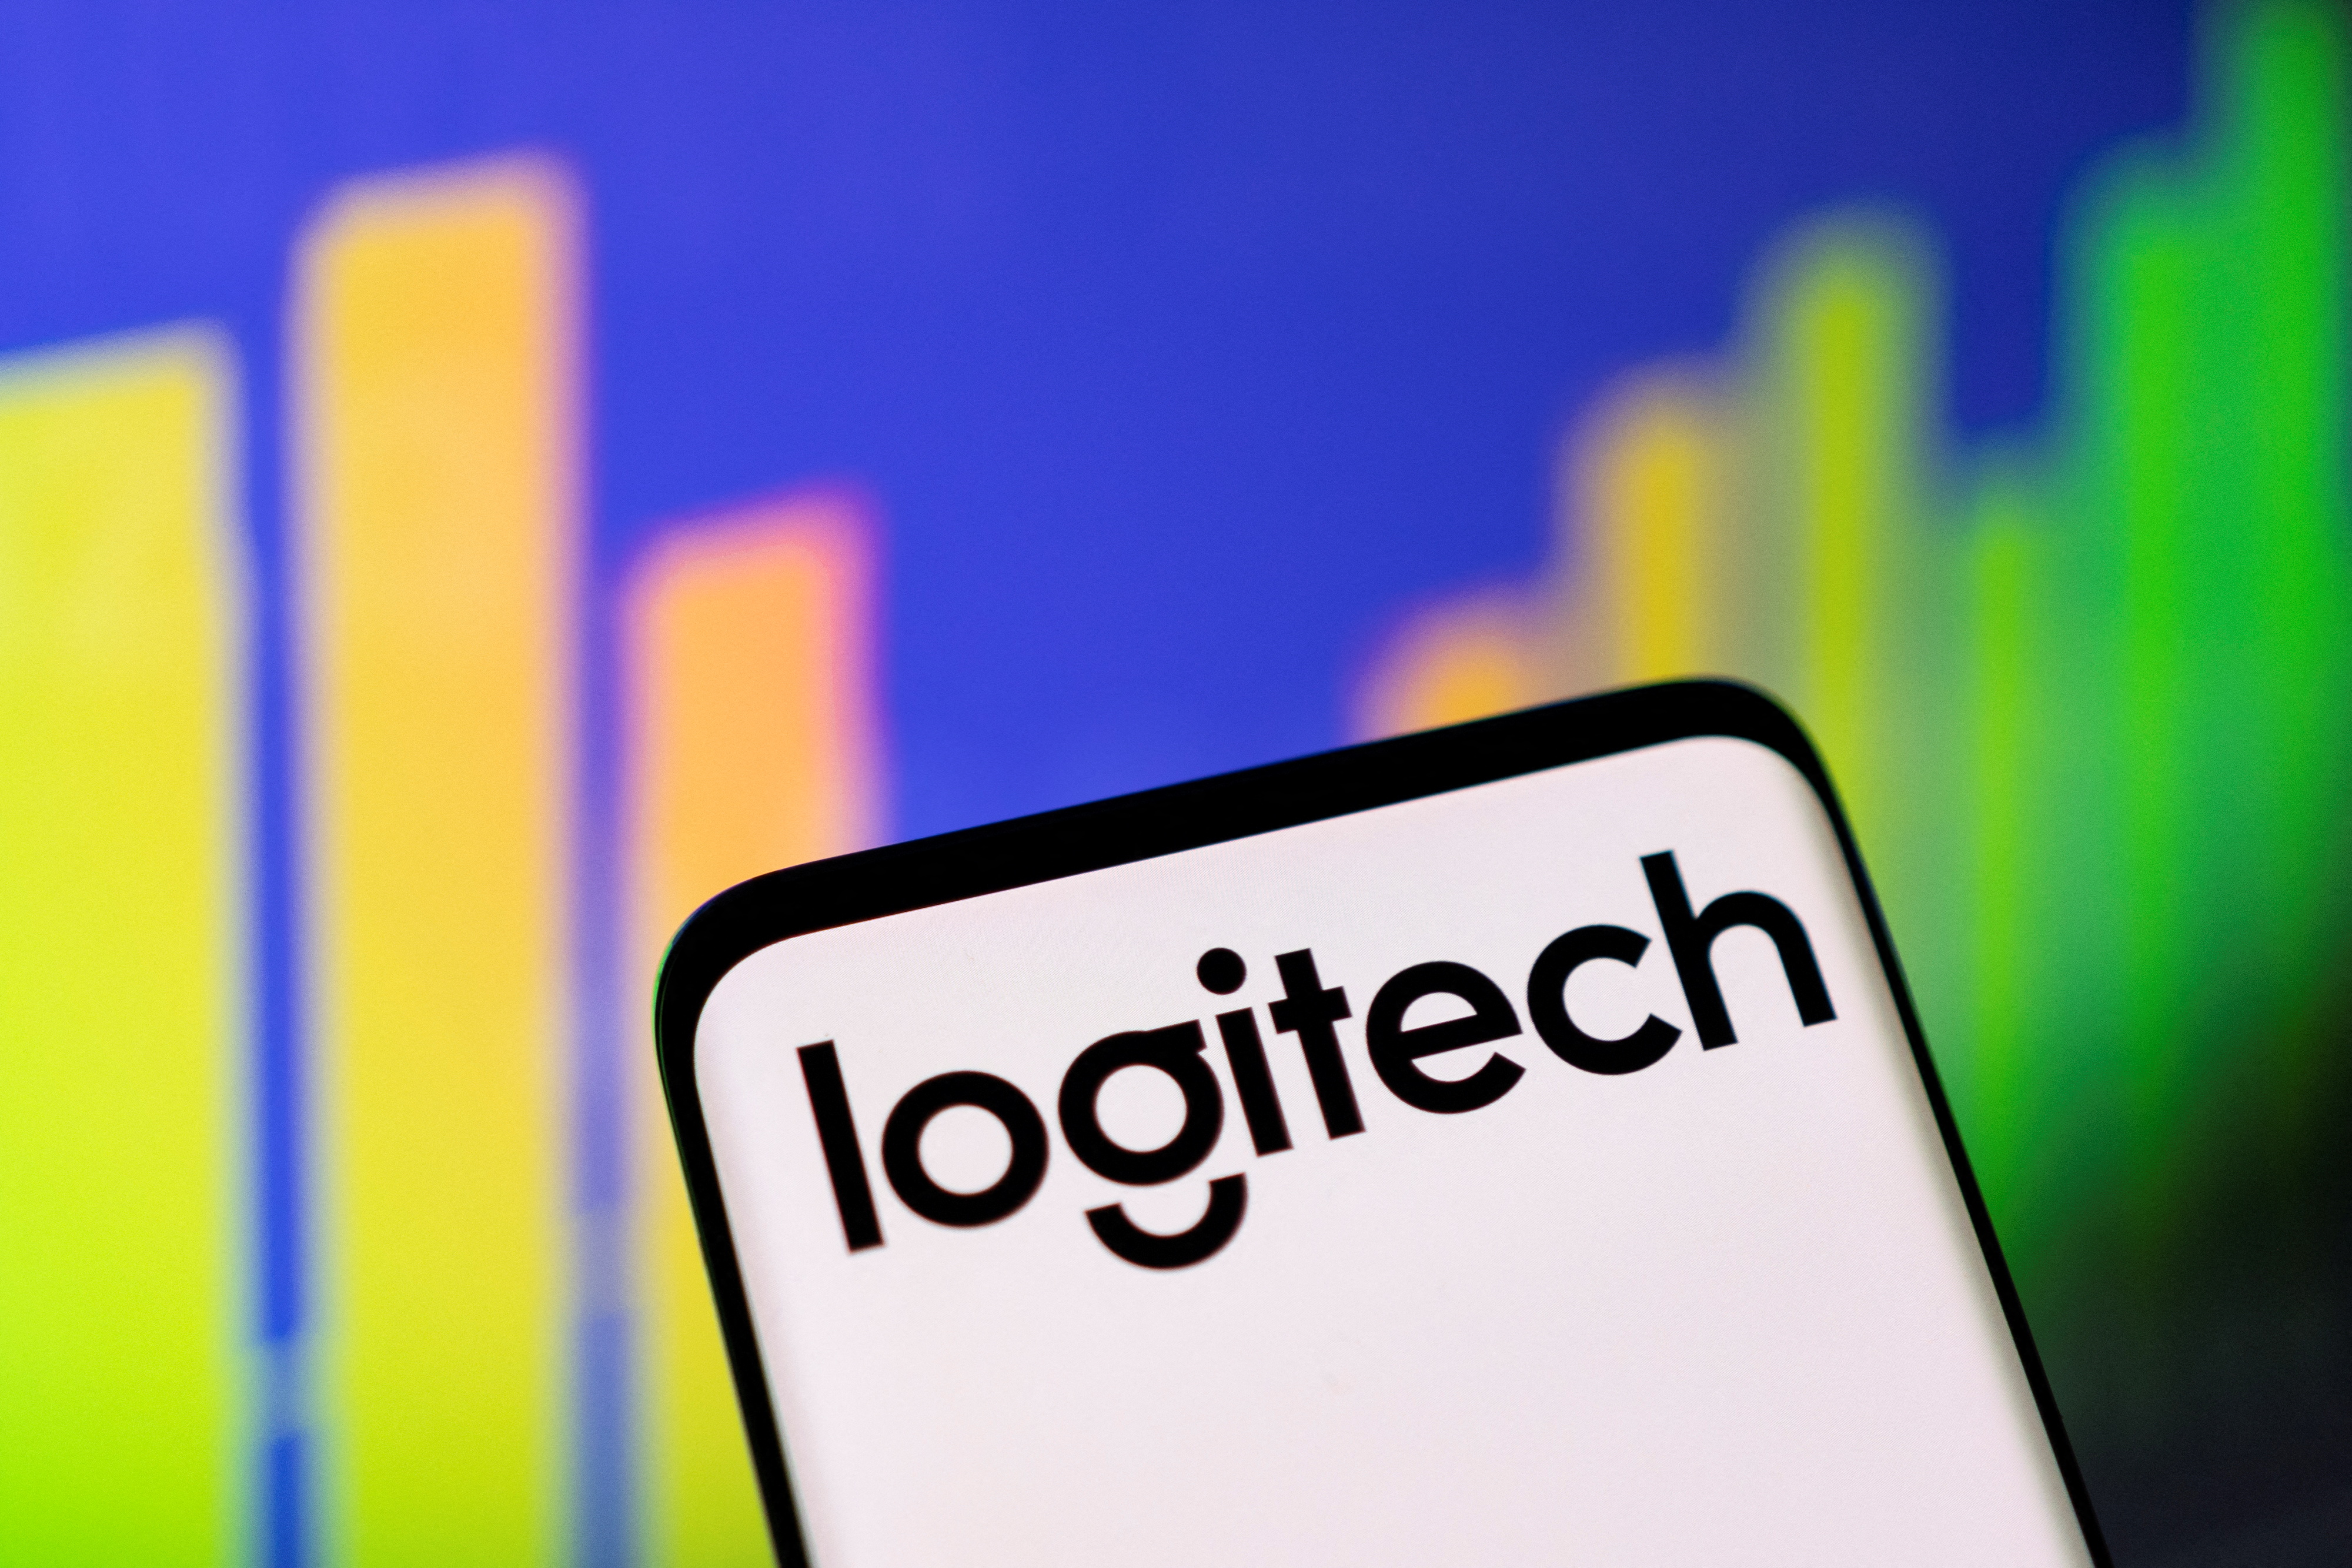 Illustration shows Logitech logo and stock graph